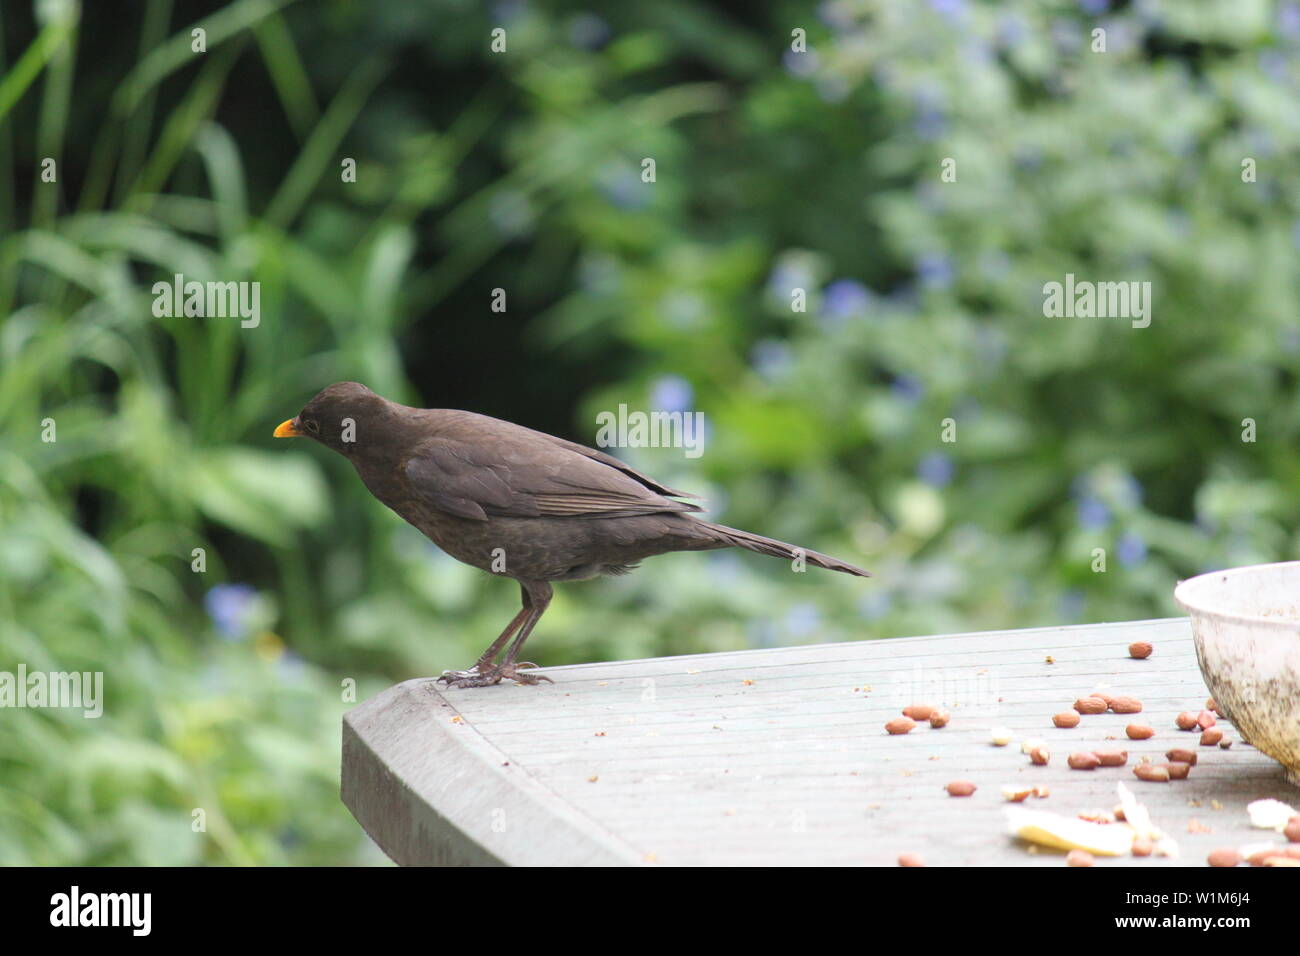 Male blackbird on a plastic bird table with peanuts, bread and water bowl in a garden in Wimbledon, South London, UK Stock Photo